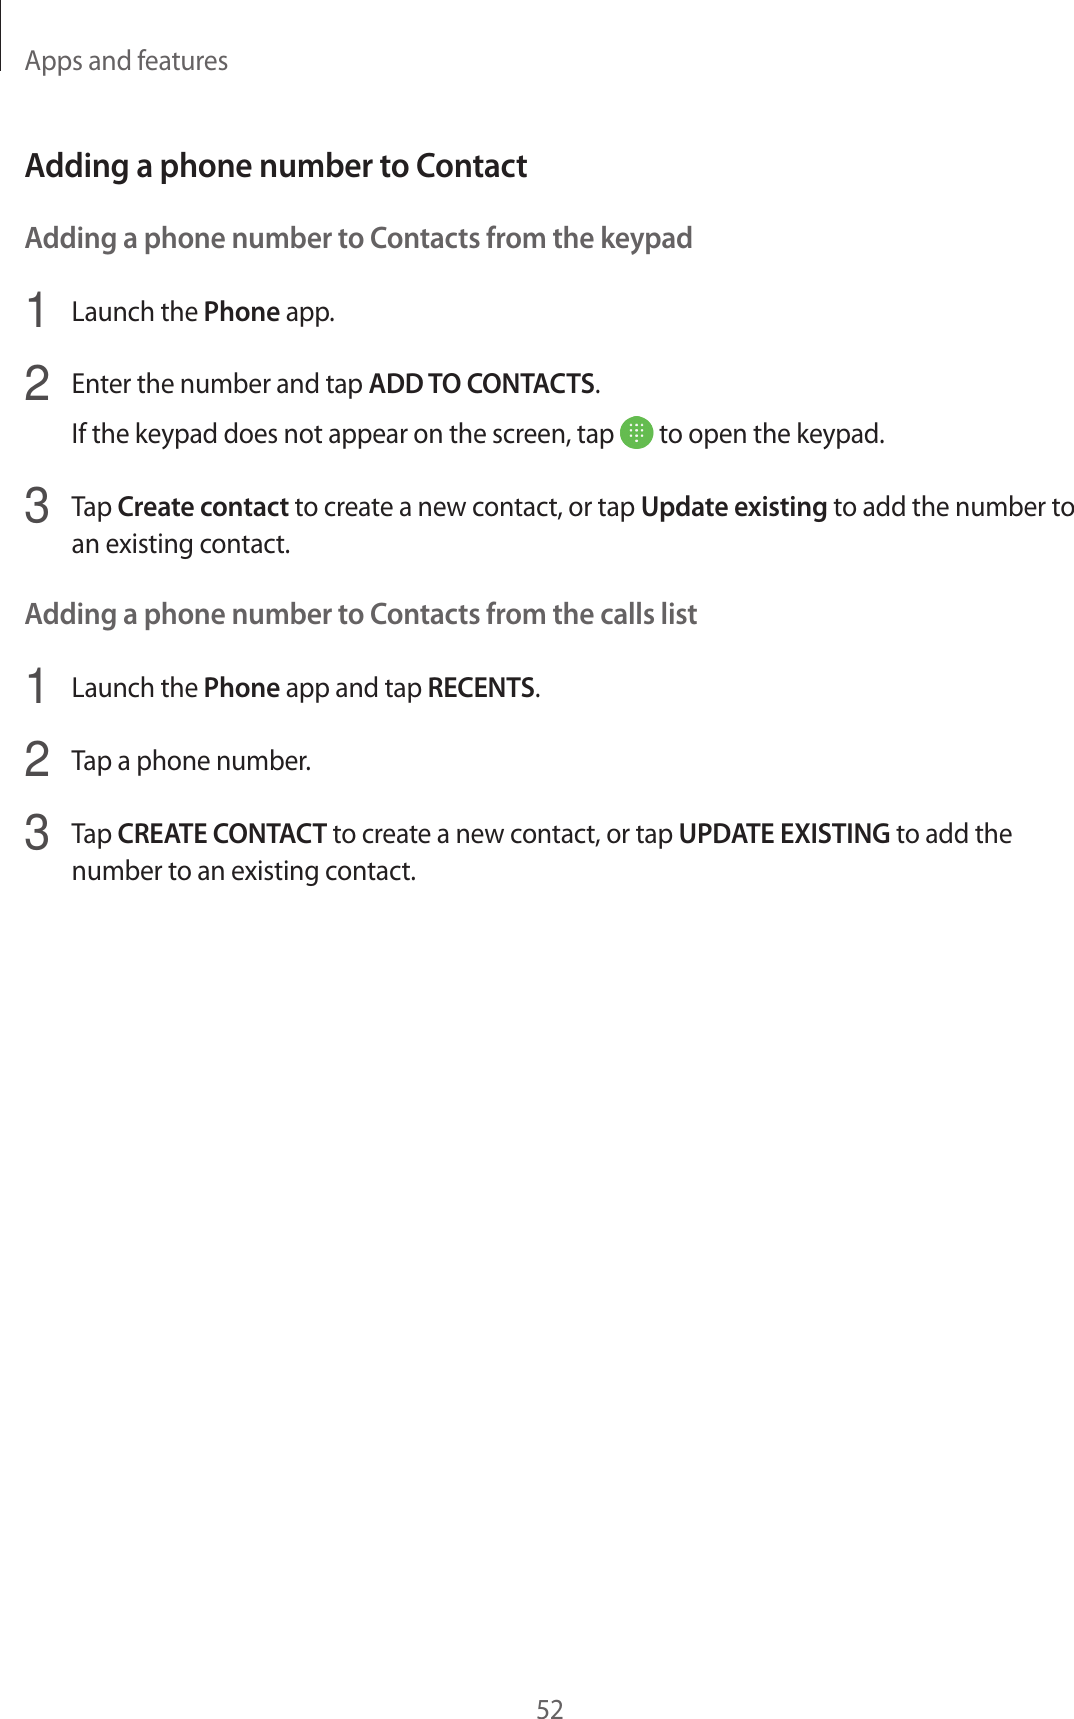 Apps and features52Adding a phone number to ContactAdding a phone number to Contacts from the keypad1  Launch the Phone app.2  Enter the number and tap ADD TO CONTACTS.If the keypad does not appear on the screen, tap   to open the keypad.3  Tap Create contact to create a new contact, or tap Update existing to add the number to an existing contact.Adding a phone number to Contacts from the calls list1  Launch the Phone app and tap RECENTS.2  Tap a phone number.3  Tap CREATE CONTACT to create a new contact, or tap UPDATE EXISTING to add the number to an existing contact.